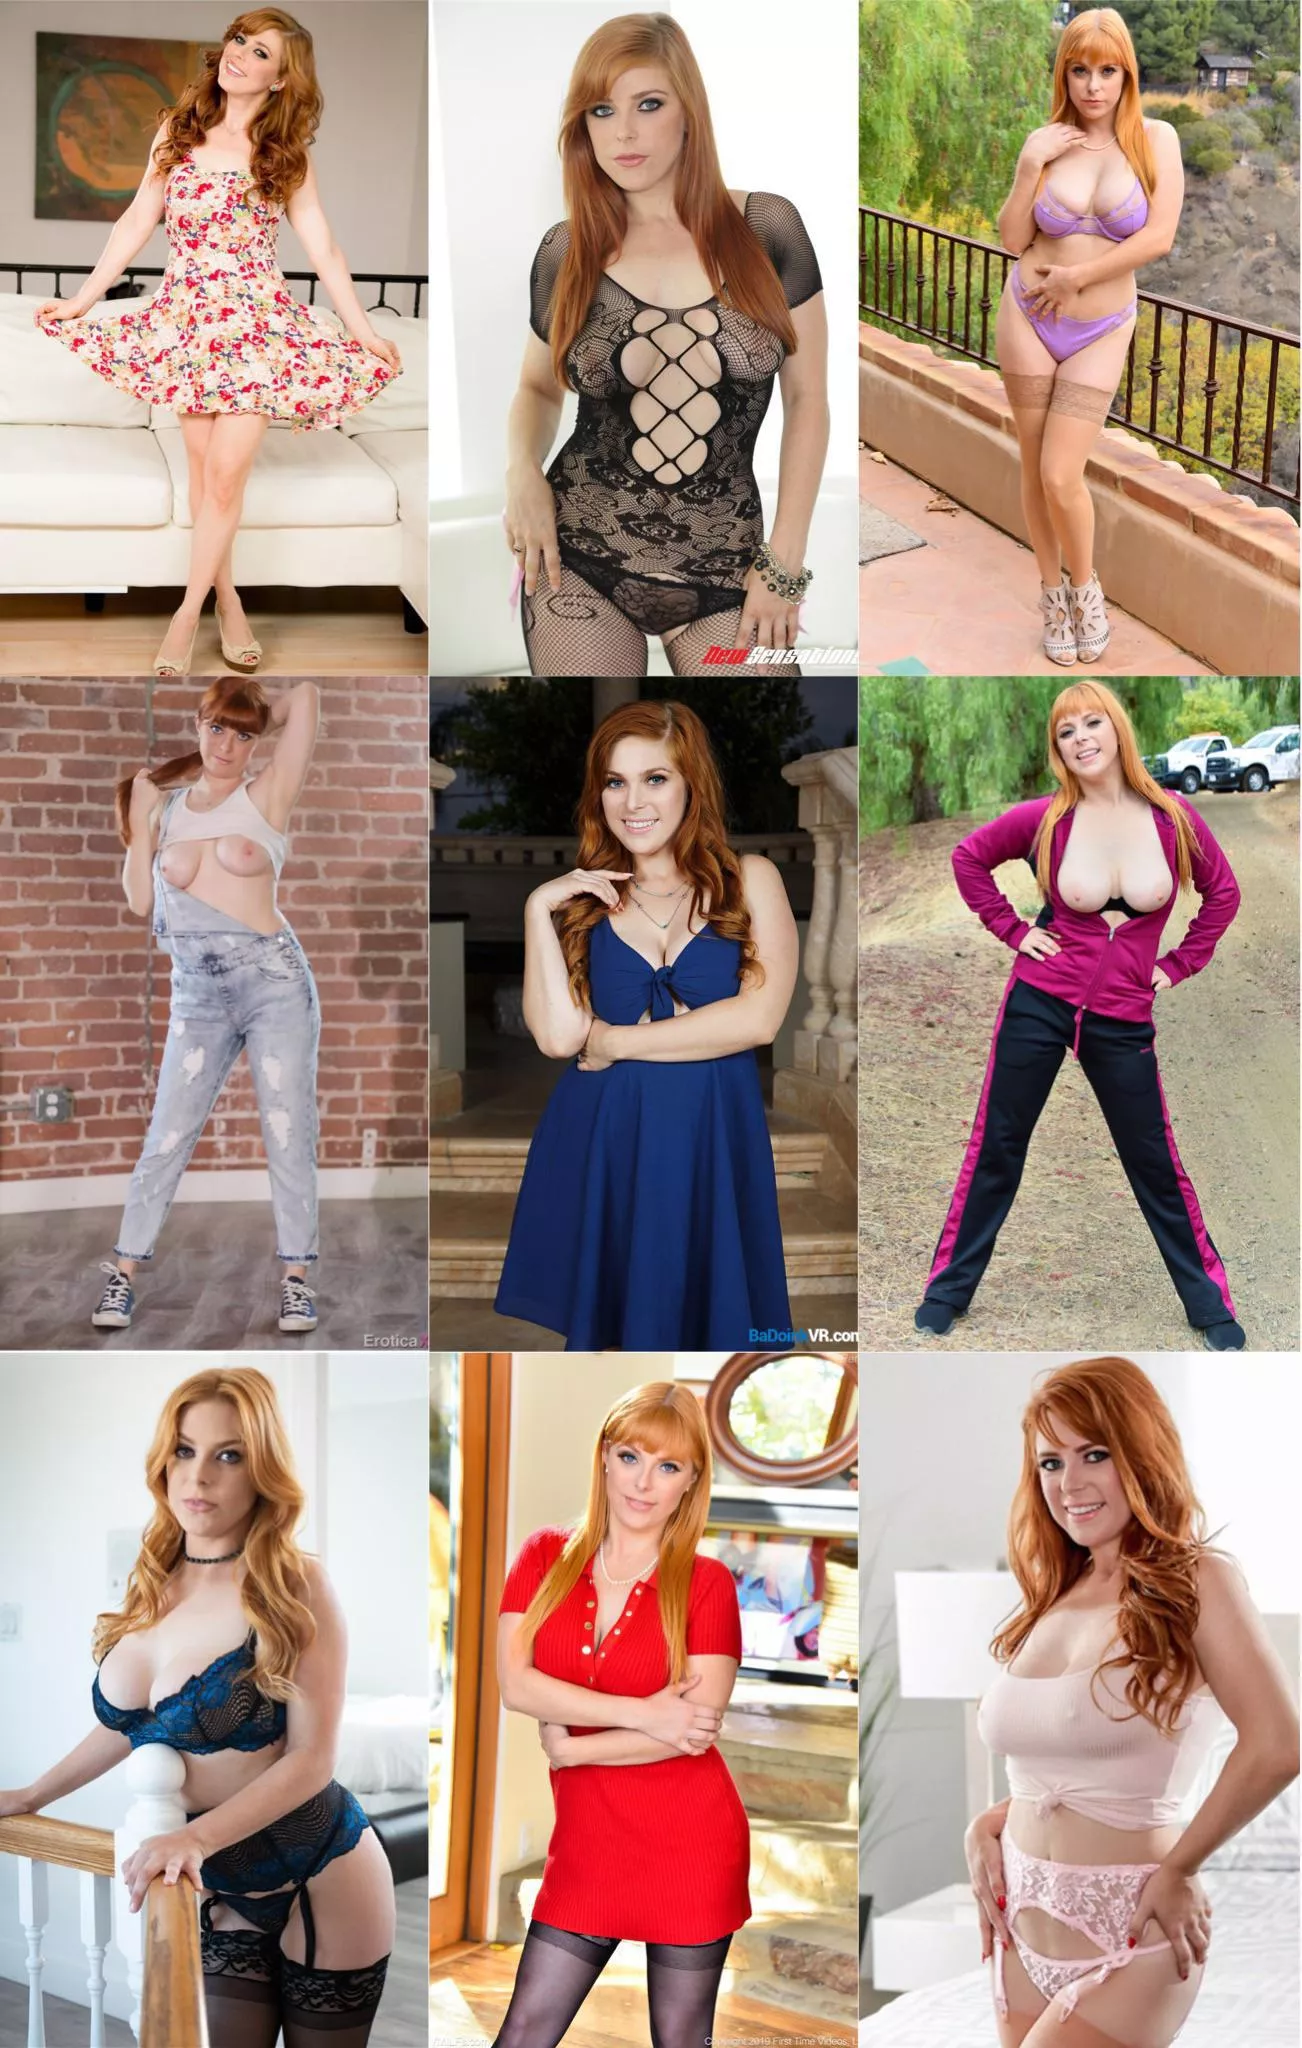 Hottest photoshoot the penny pax naked Bones